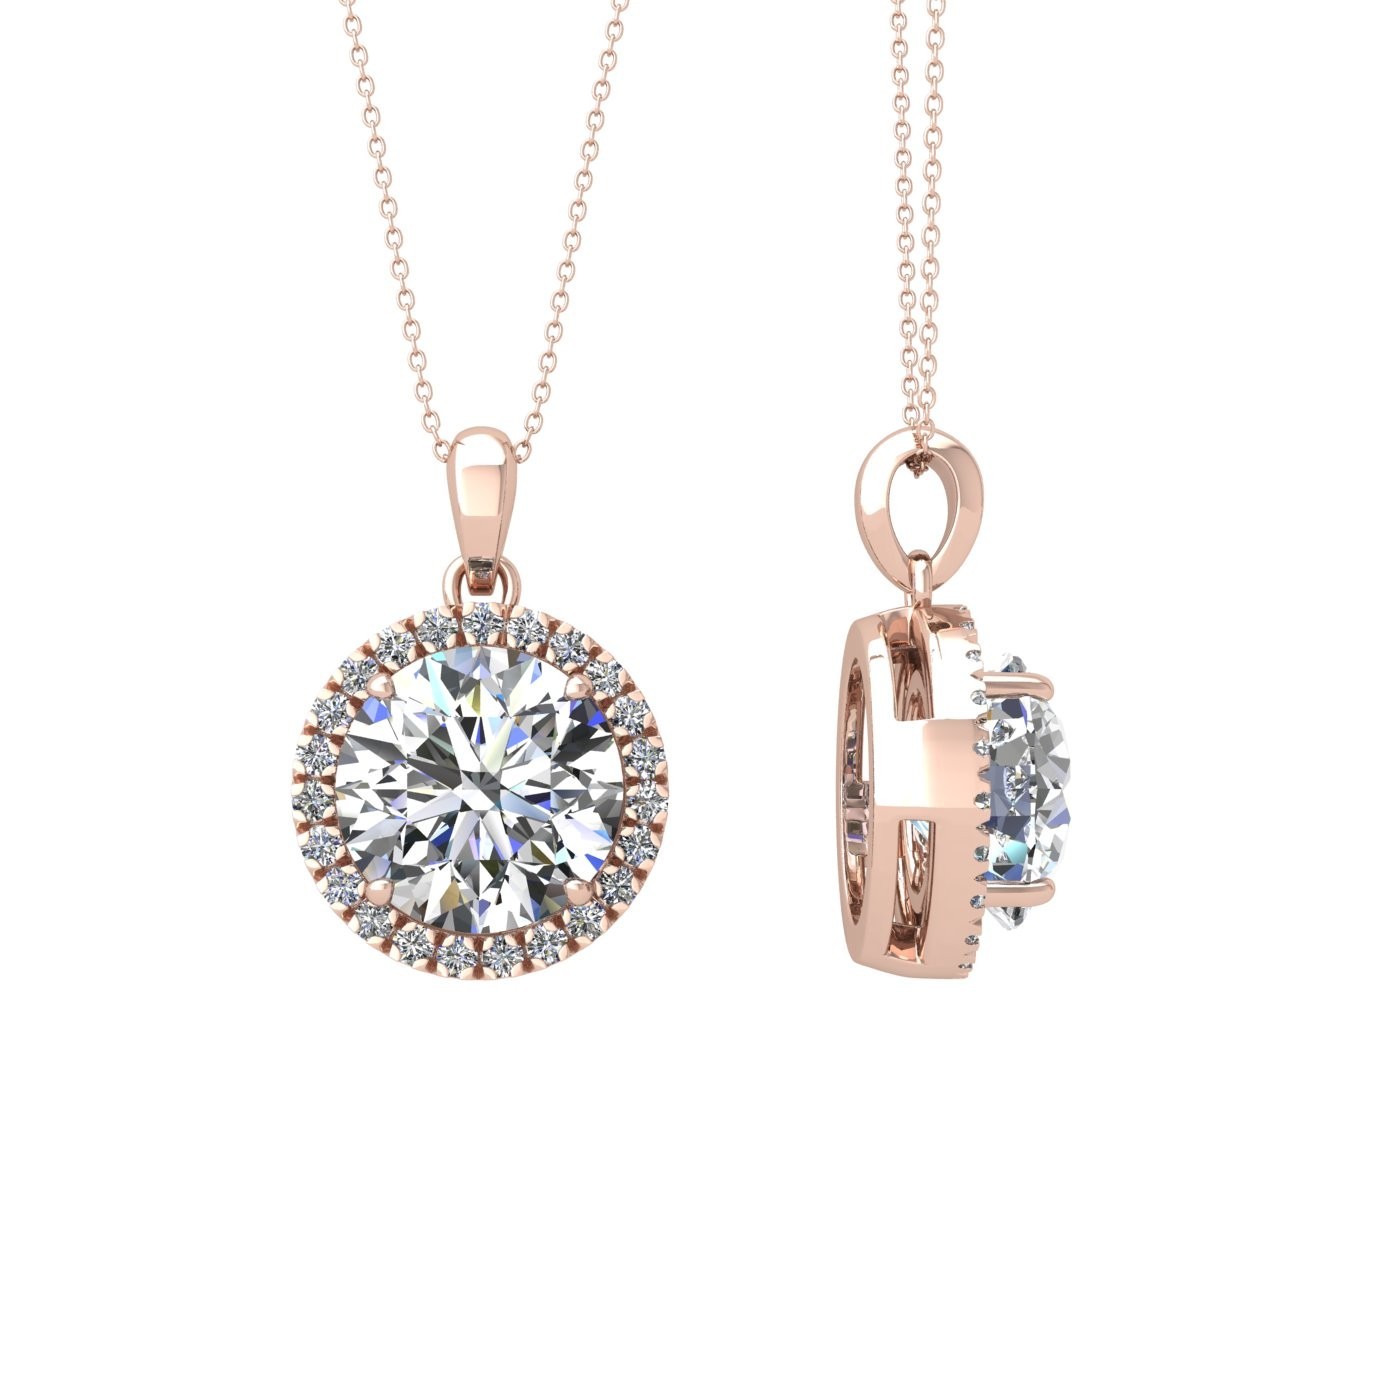 18k rose gold  1 ct 4 prong round shape diamond pendant with diamond pavÉ set halo including chain seperate from the pendant